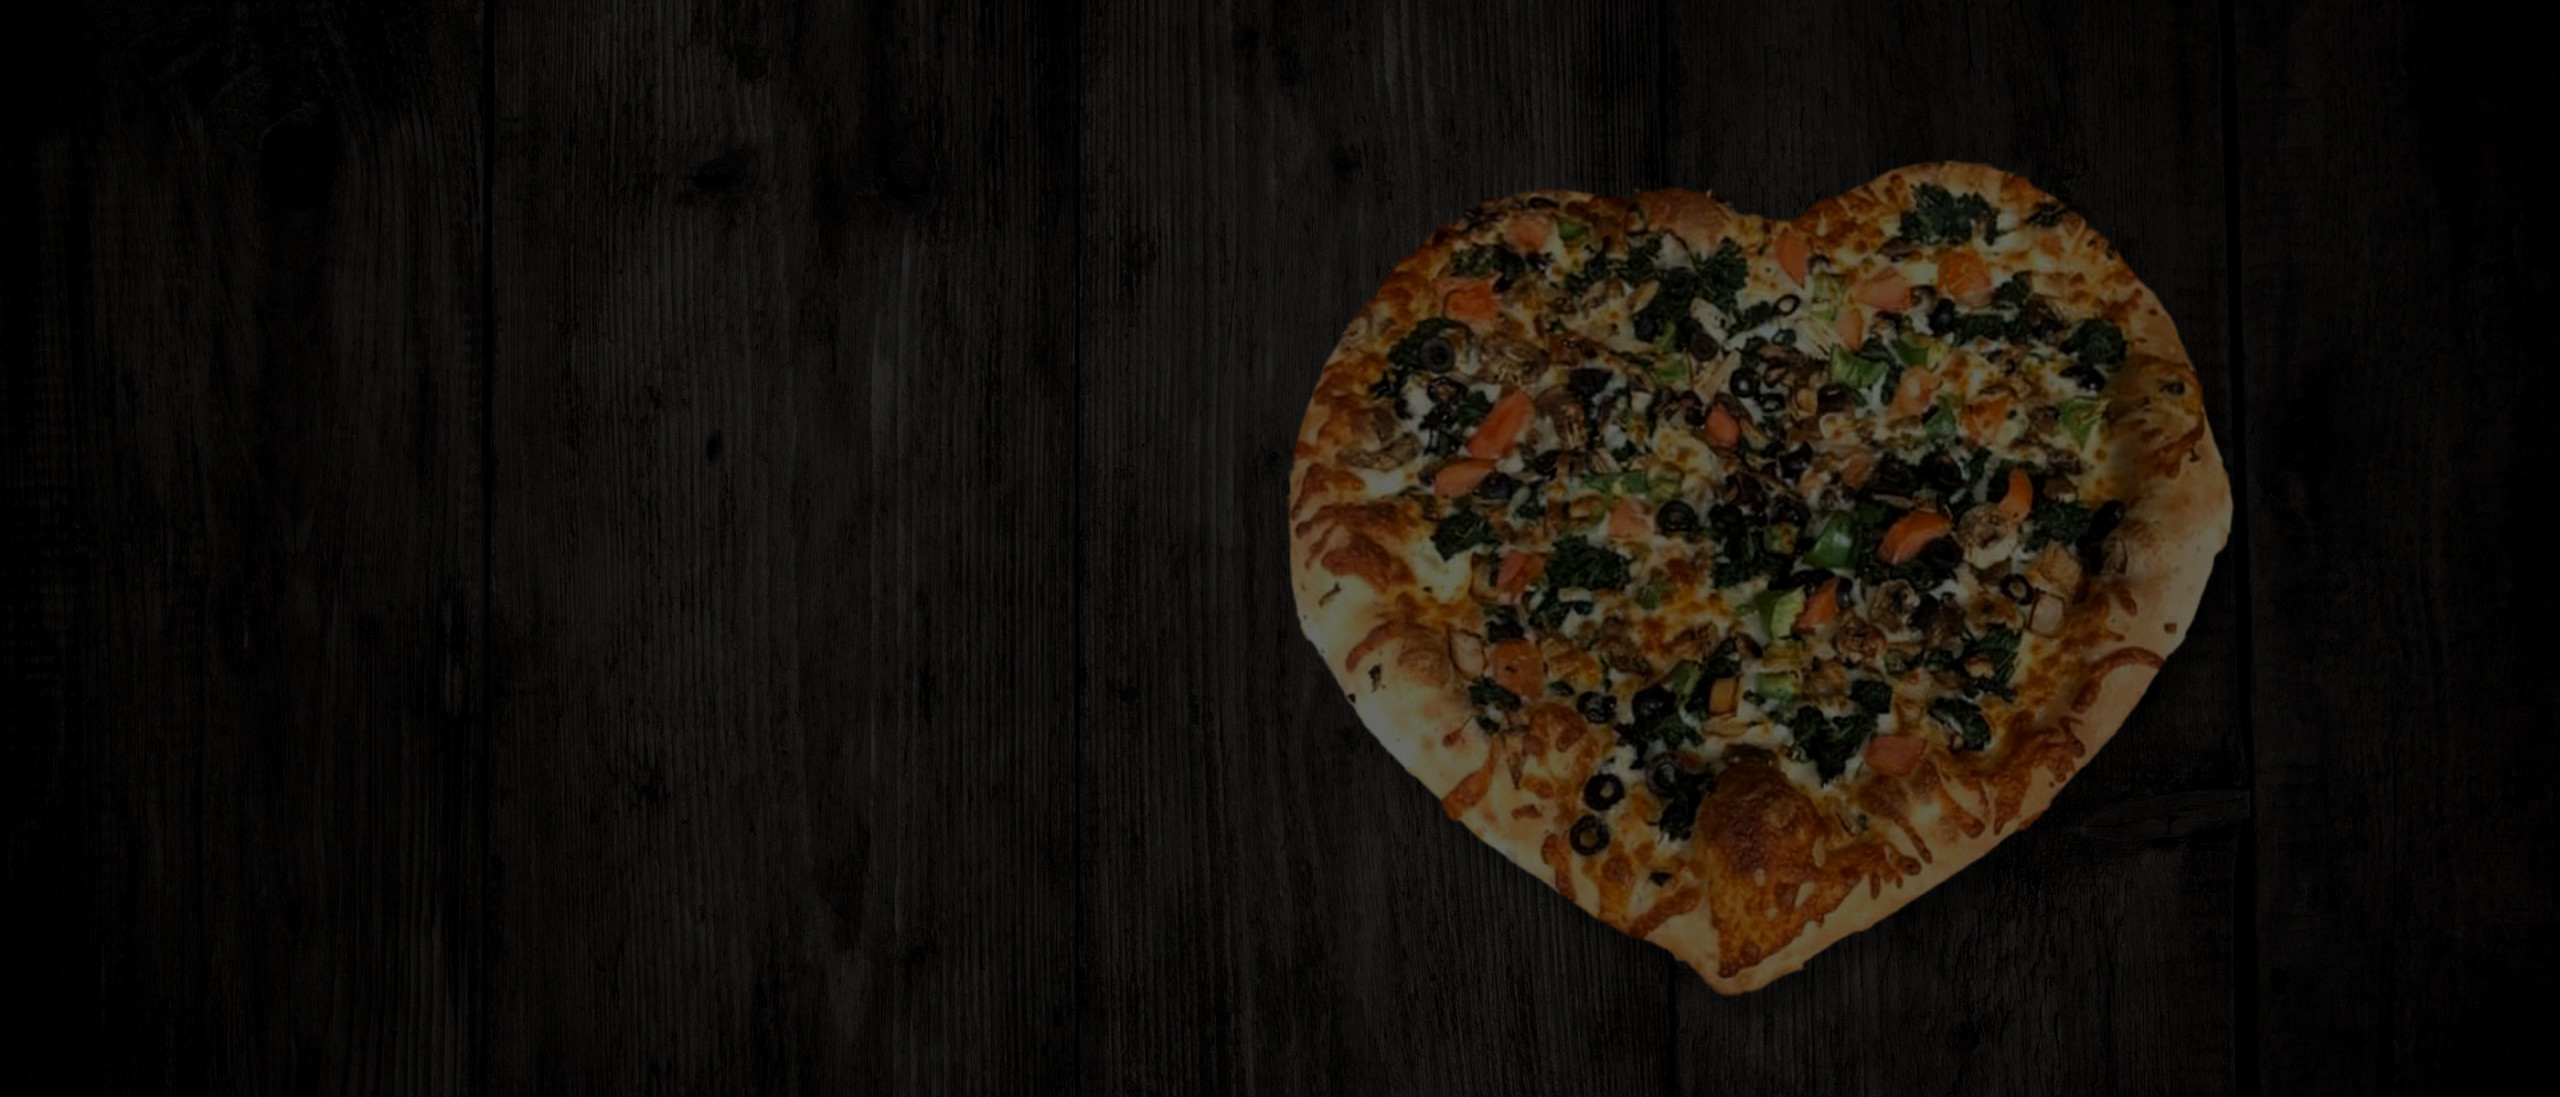 Hearth pizza with black olives on wooden background